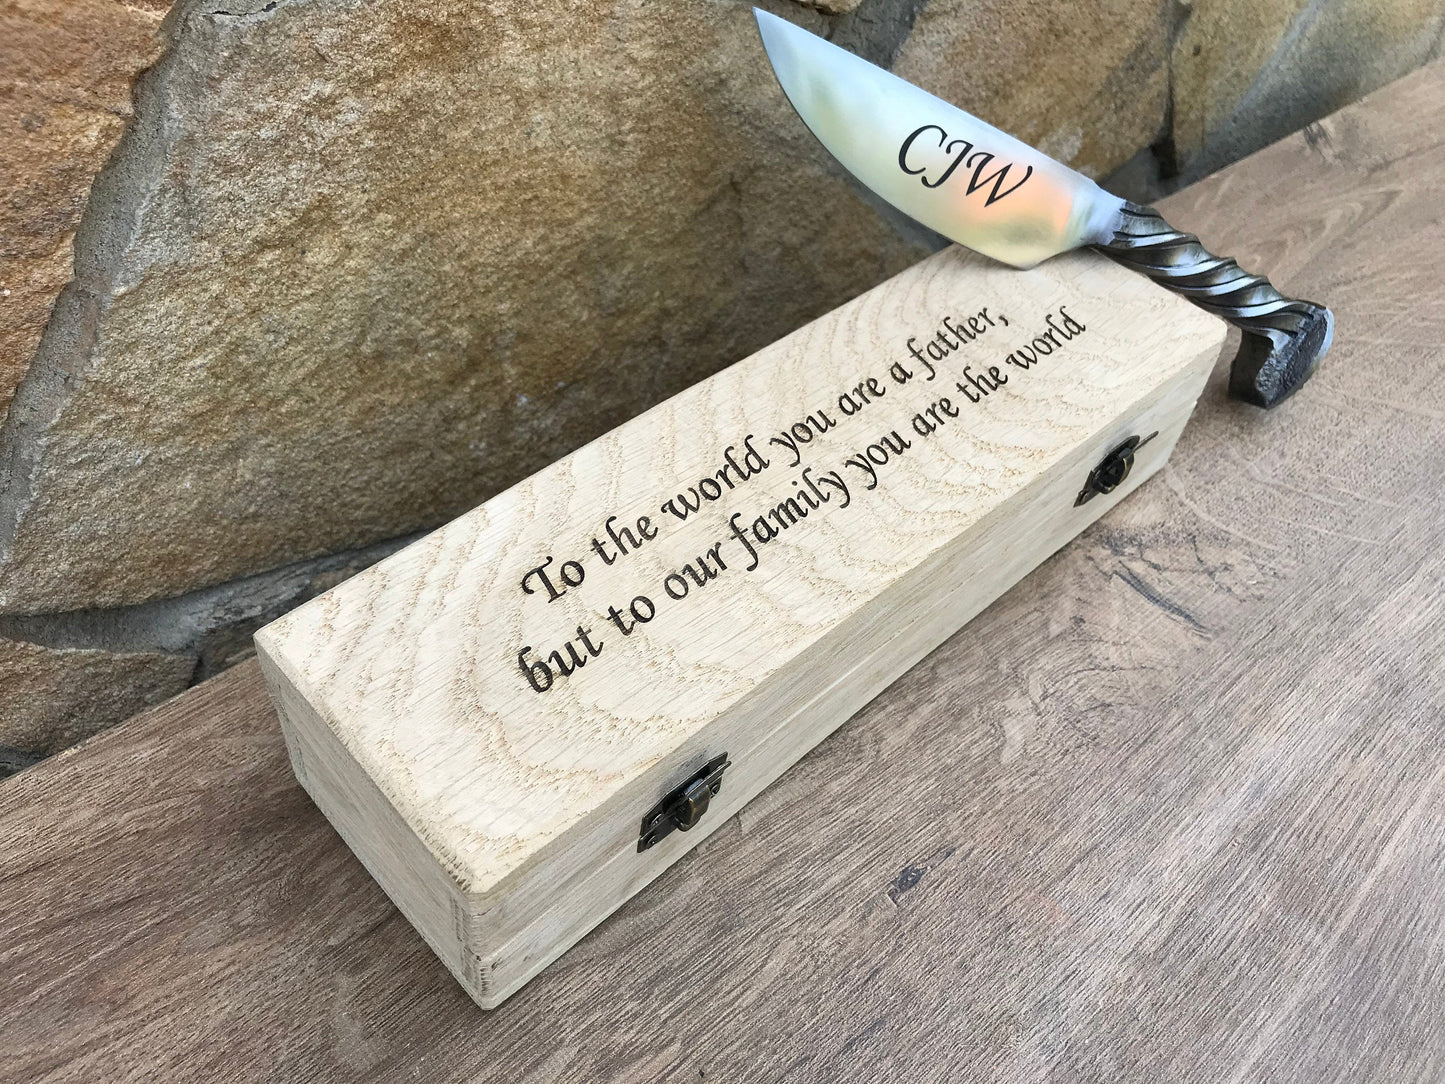 Fathers Day gift, gift for father, gift for dad, dad gift, railroad spike knife, best father, best father gift, gift for grandpa, daddy gift